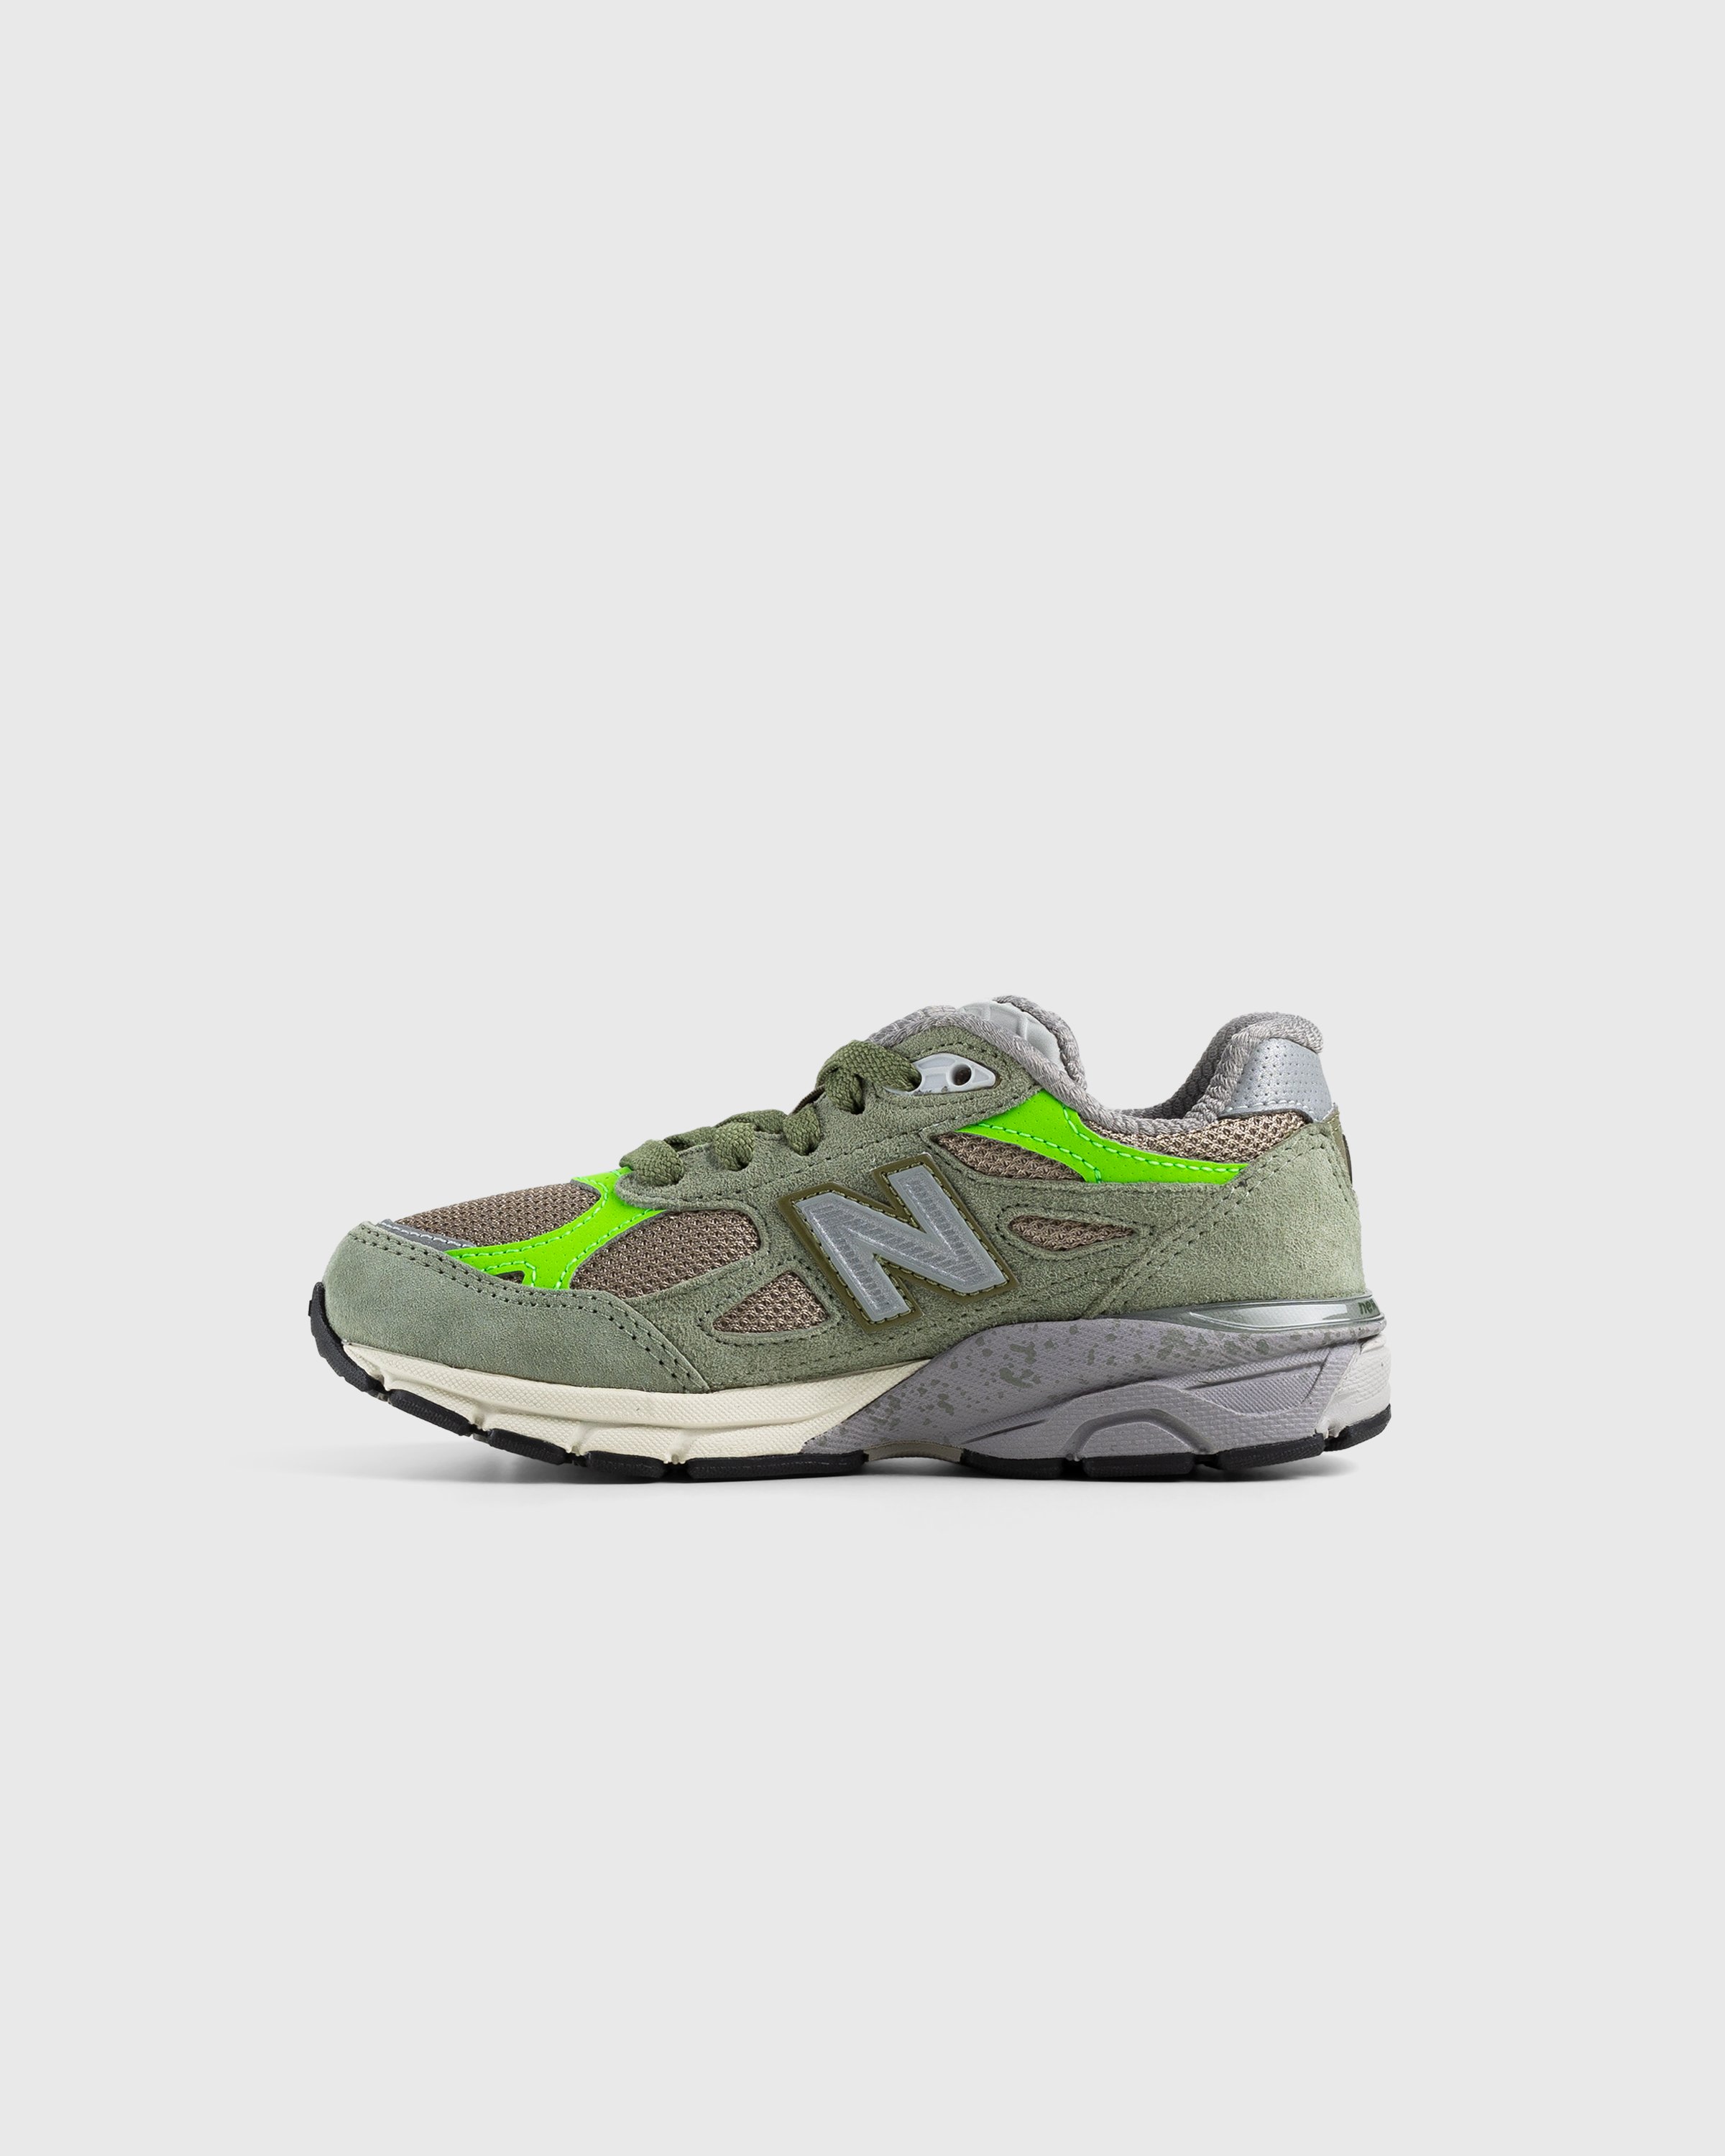 Patta x New Balance - Made in USA 990v3 Olive/White Pepper - Footwear - Green - Image 5